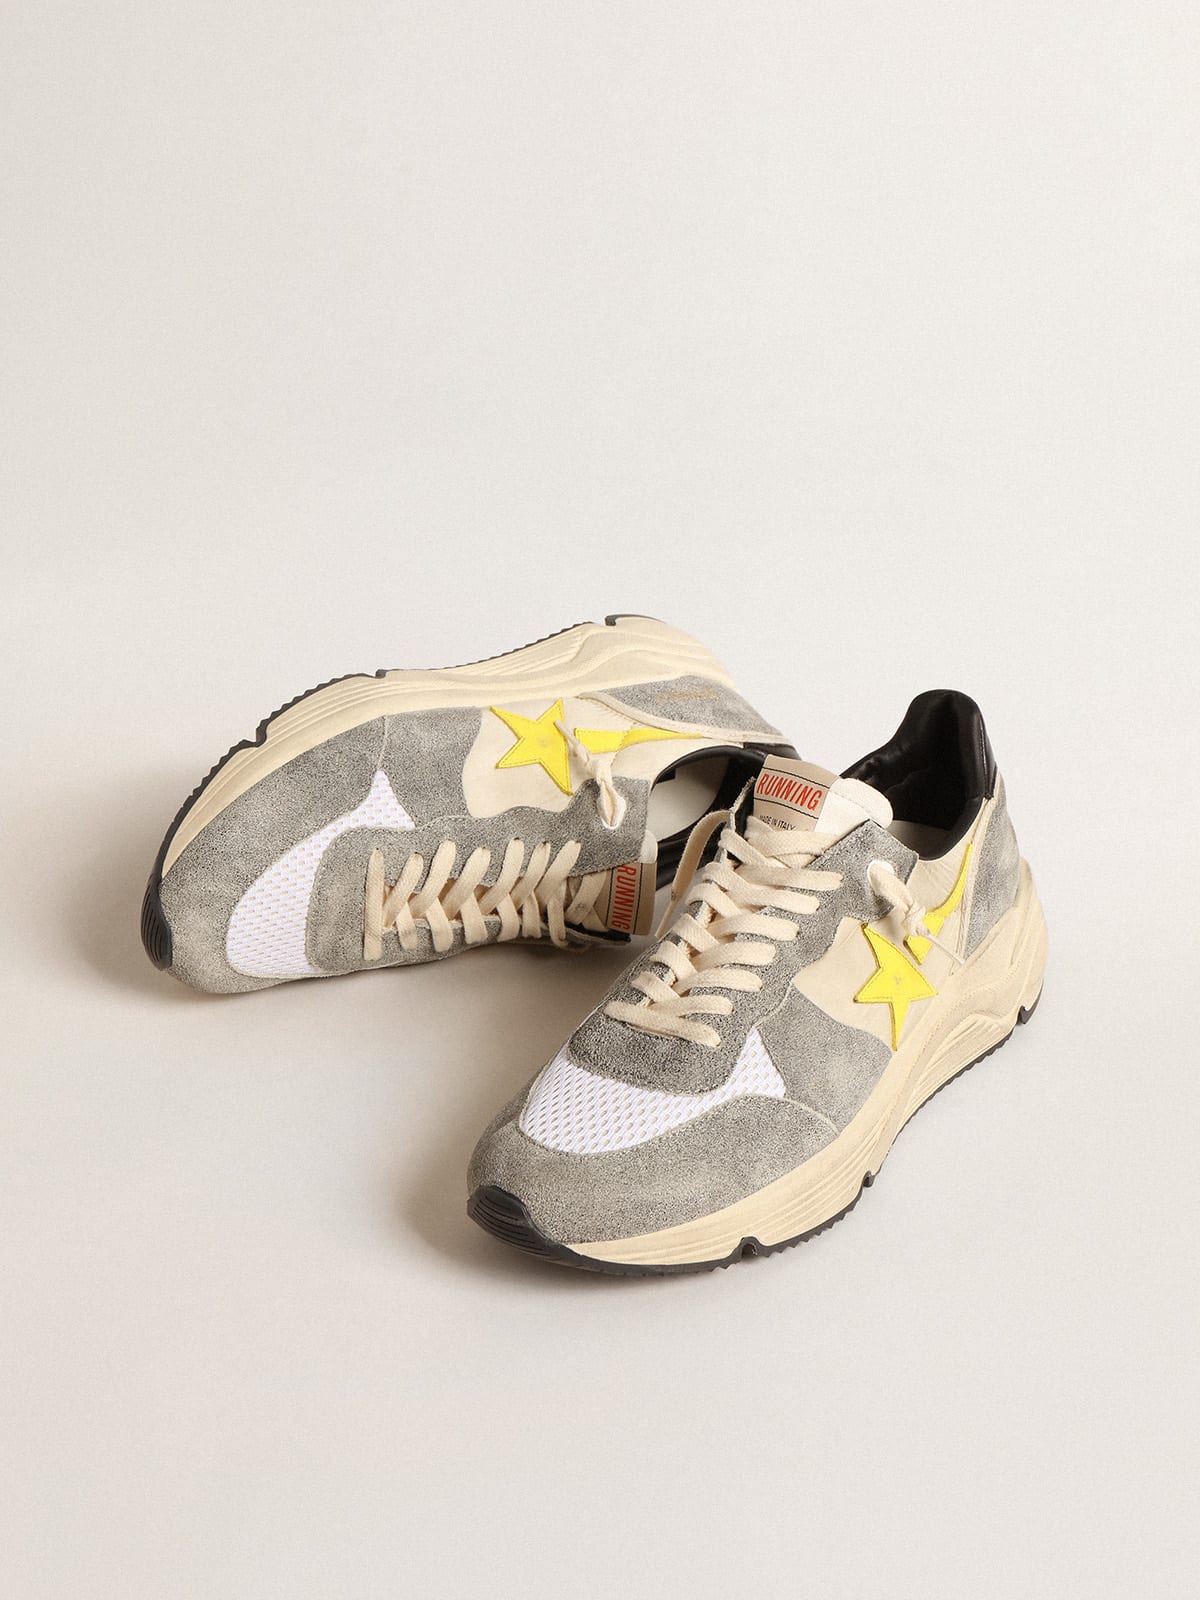 Golden Goose - Running Sole in beige nylon and gray suede with yellow star in 